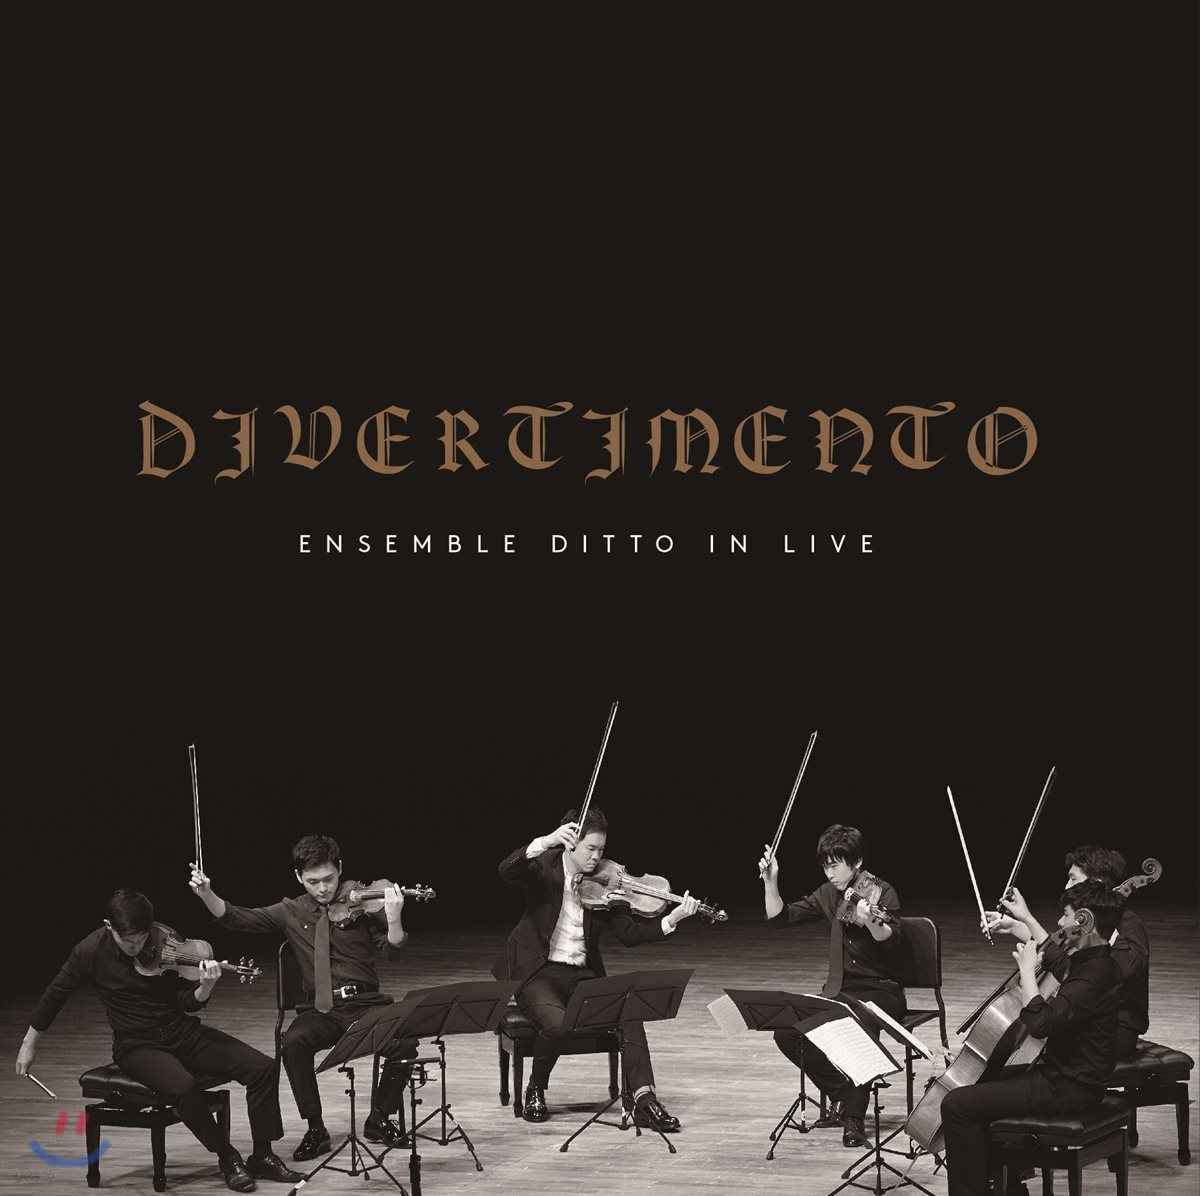 Ensemble Ditto 앙상블 디토 10주년 페스티벌 라이브 앨범 (in Live ‘Divertimento’) 